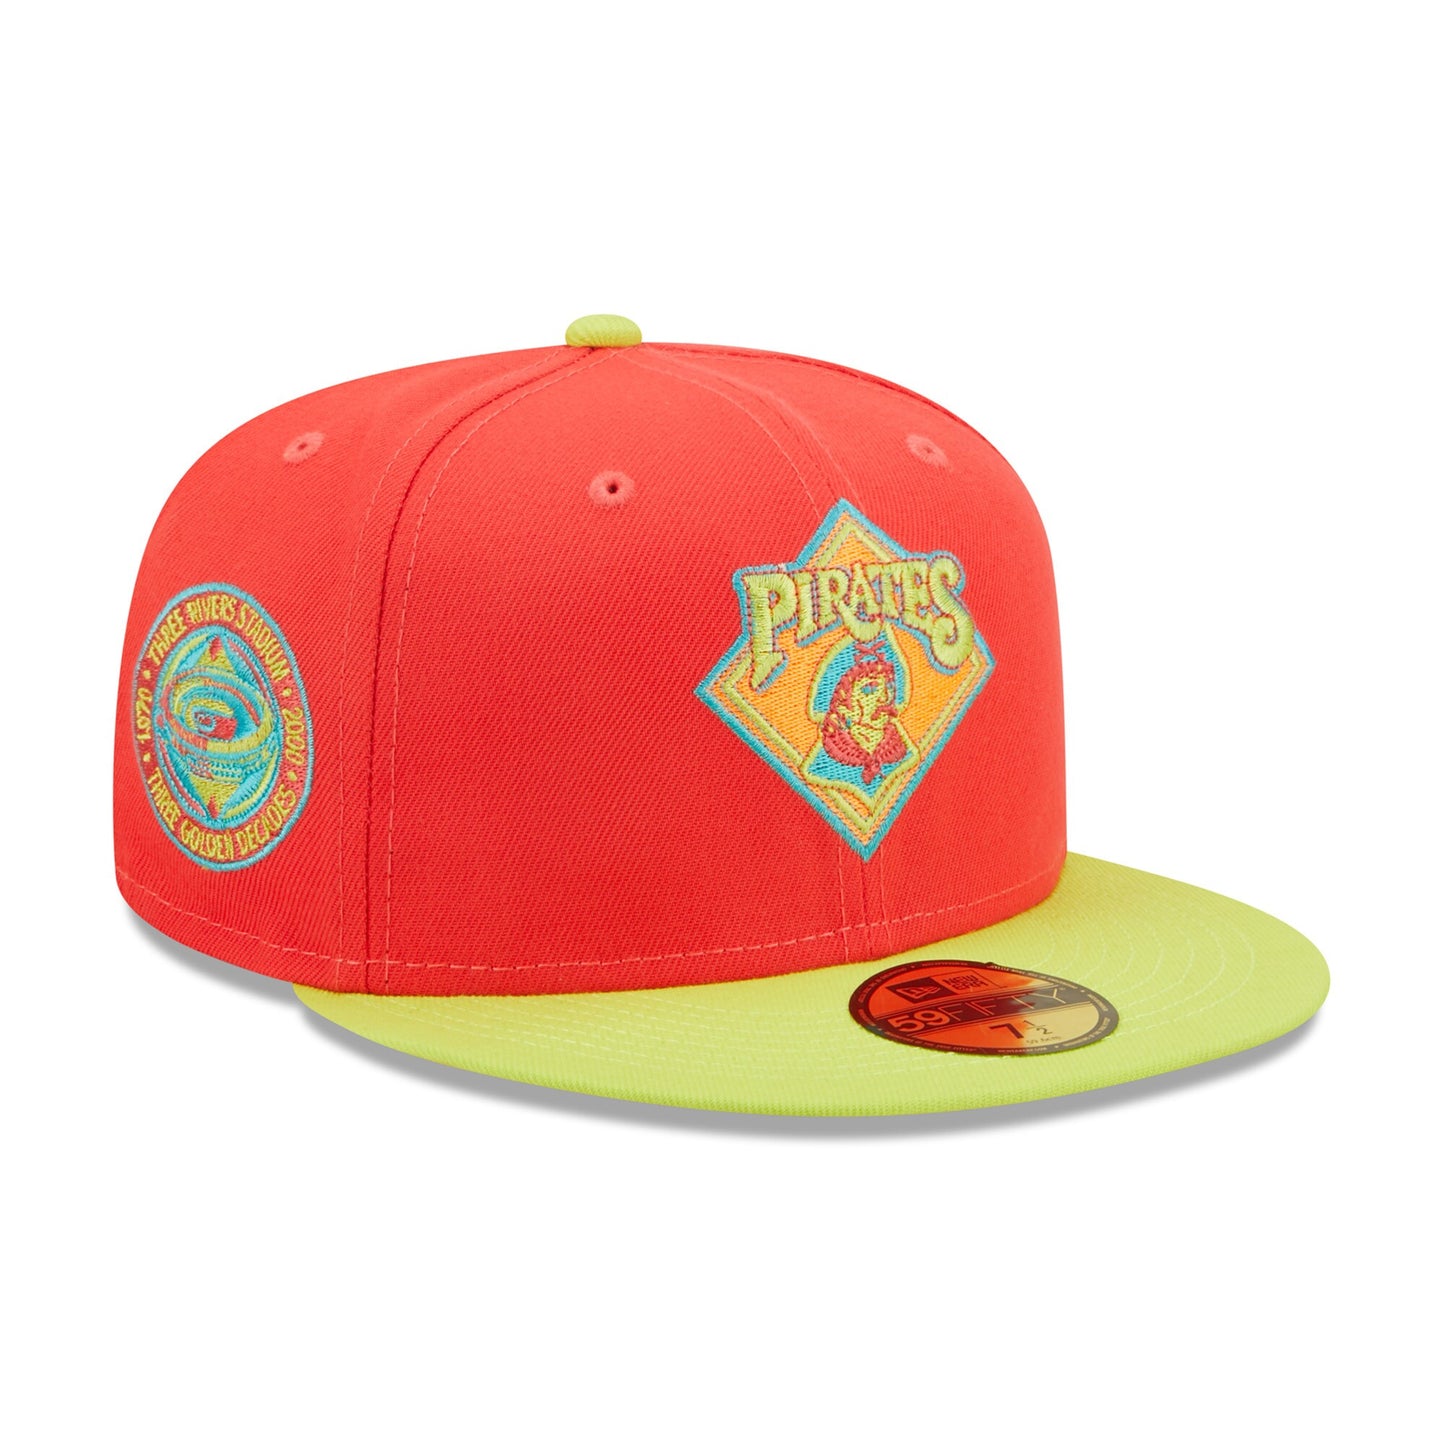 Pittsburgh Pirates New Era Lava Highlighter Combo 59FIFTY Fitted Hat - Red/Neon Green